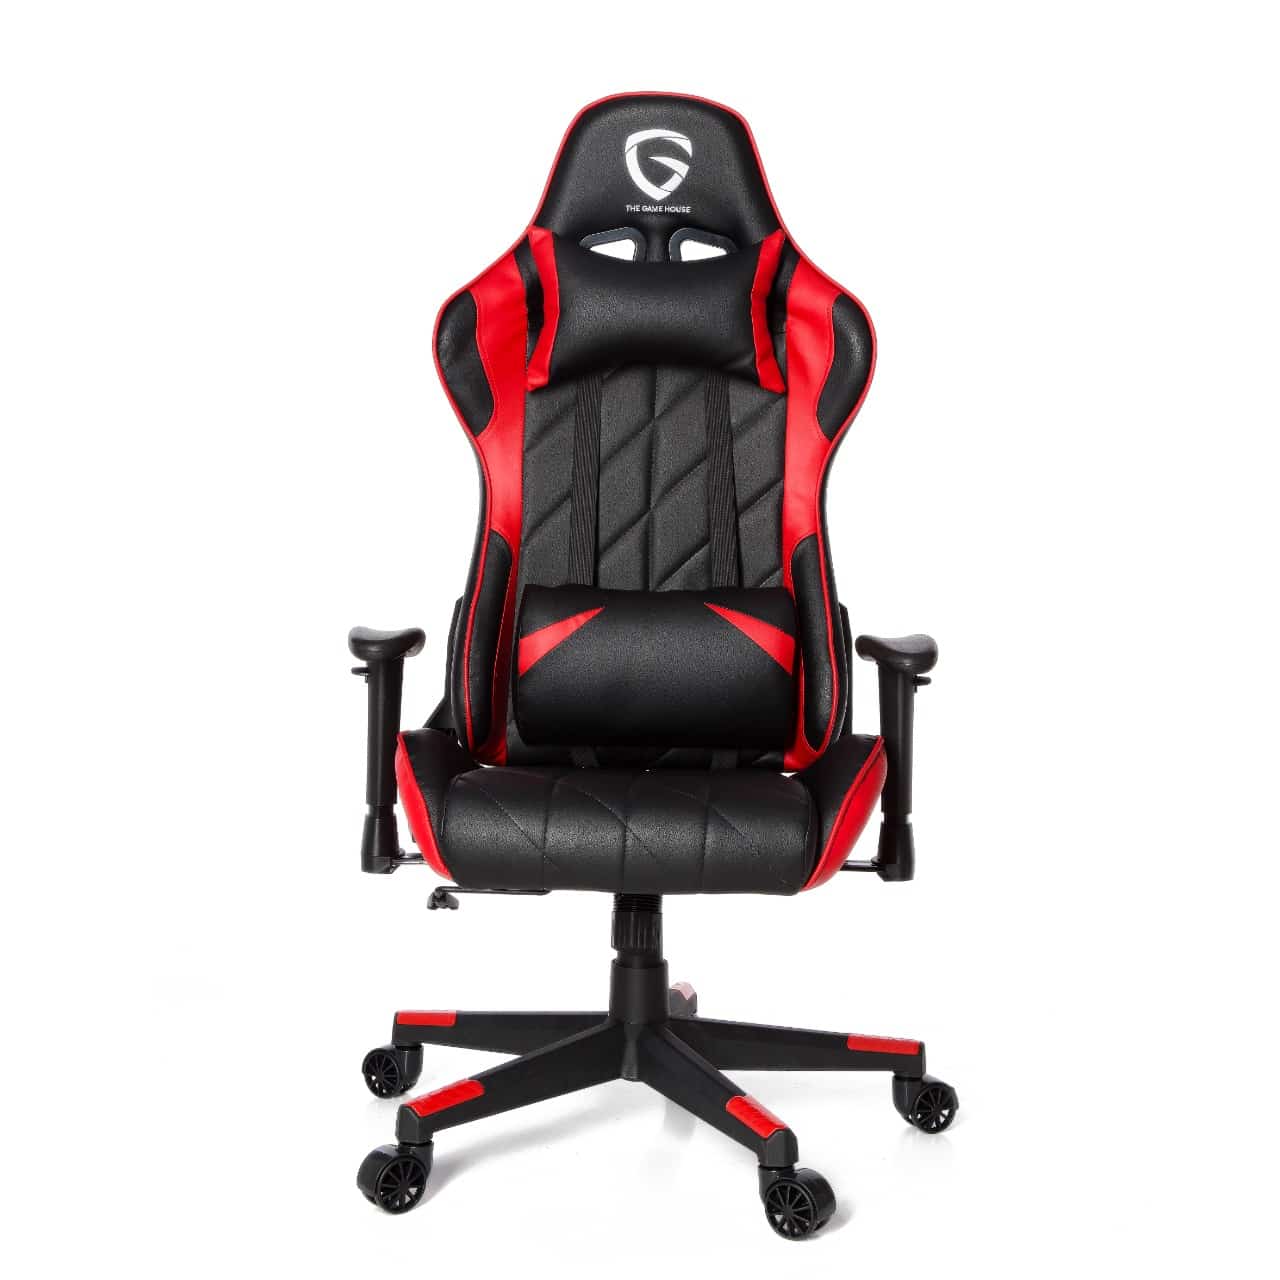 Gamer24hs has gamer chairs with discounts of up to 25 percent and installments without interest